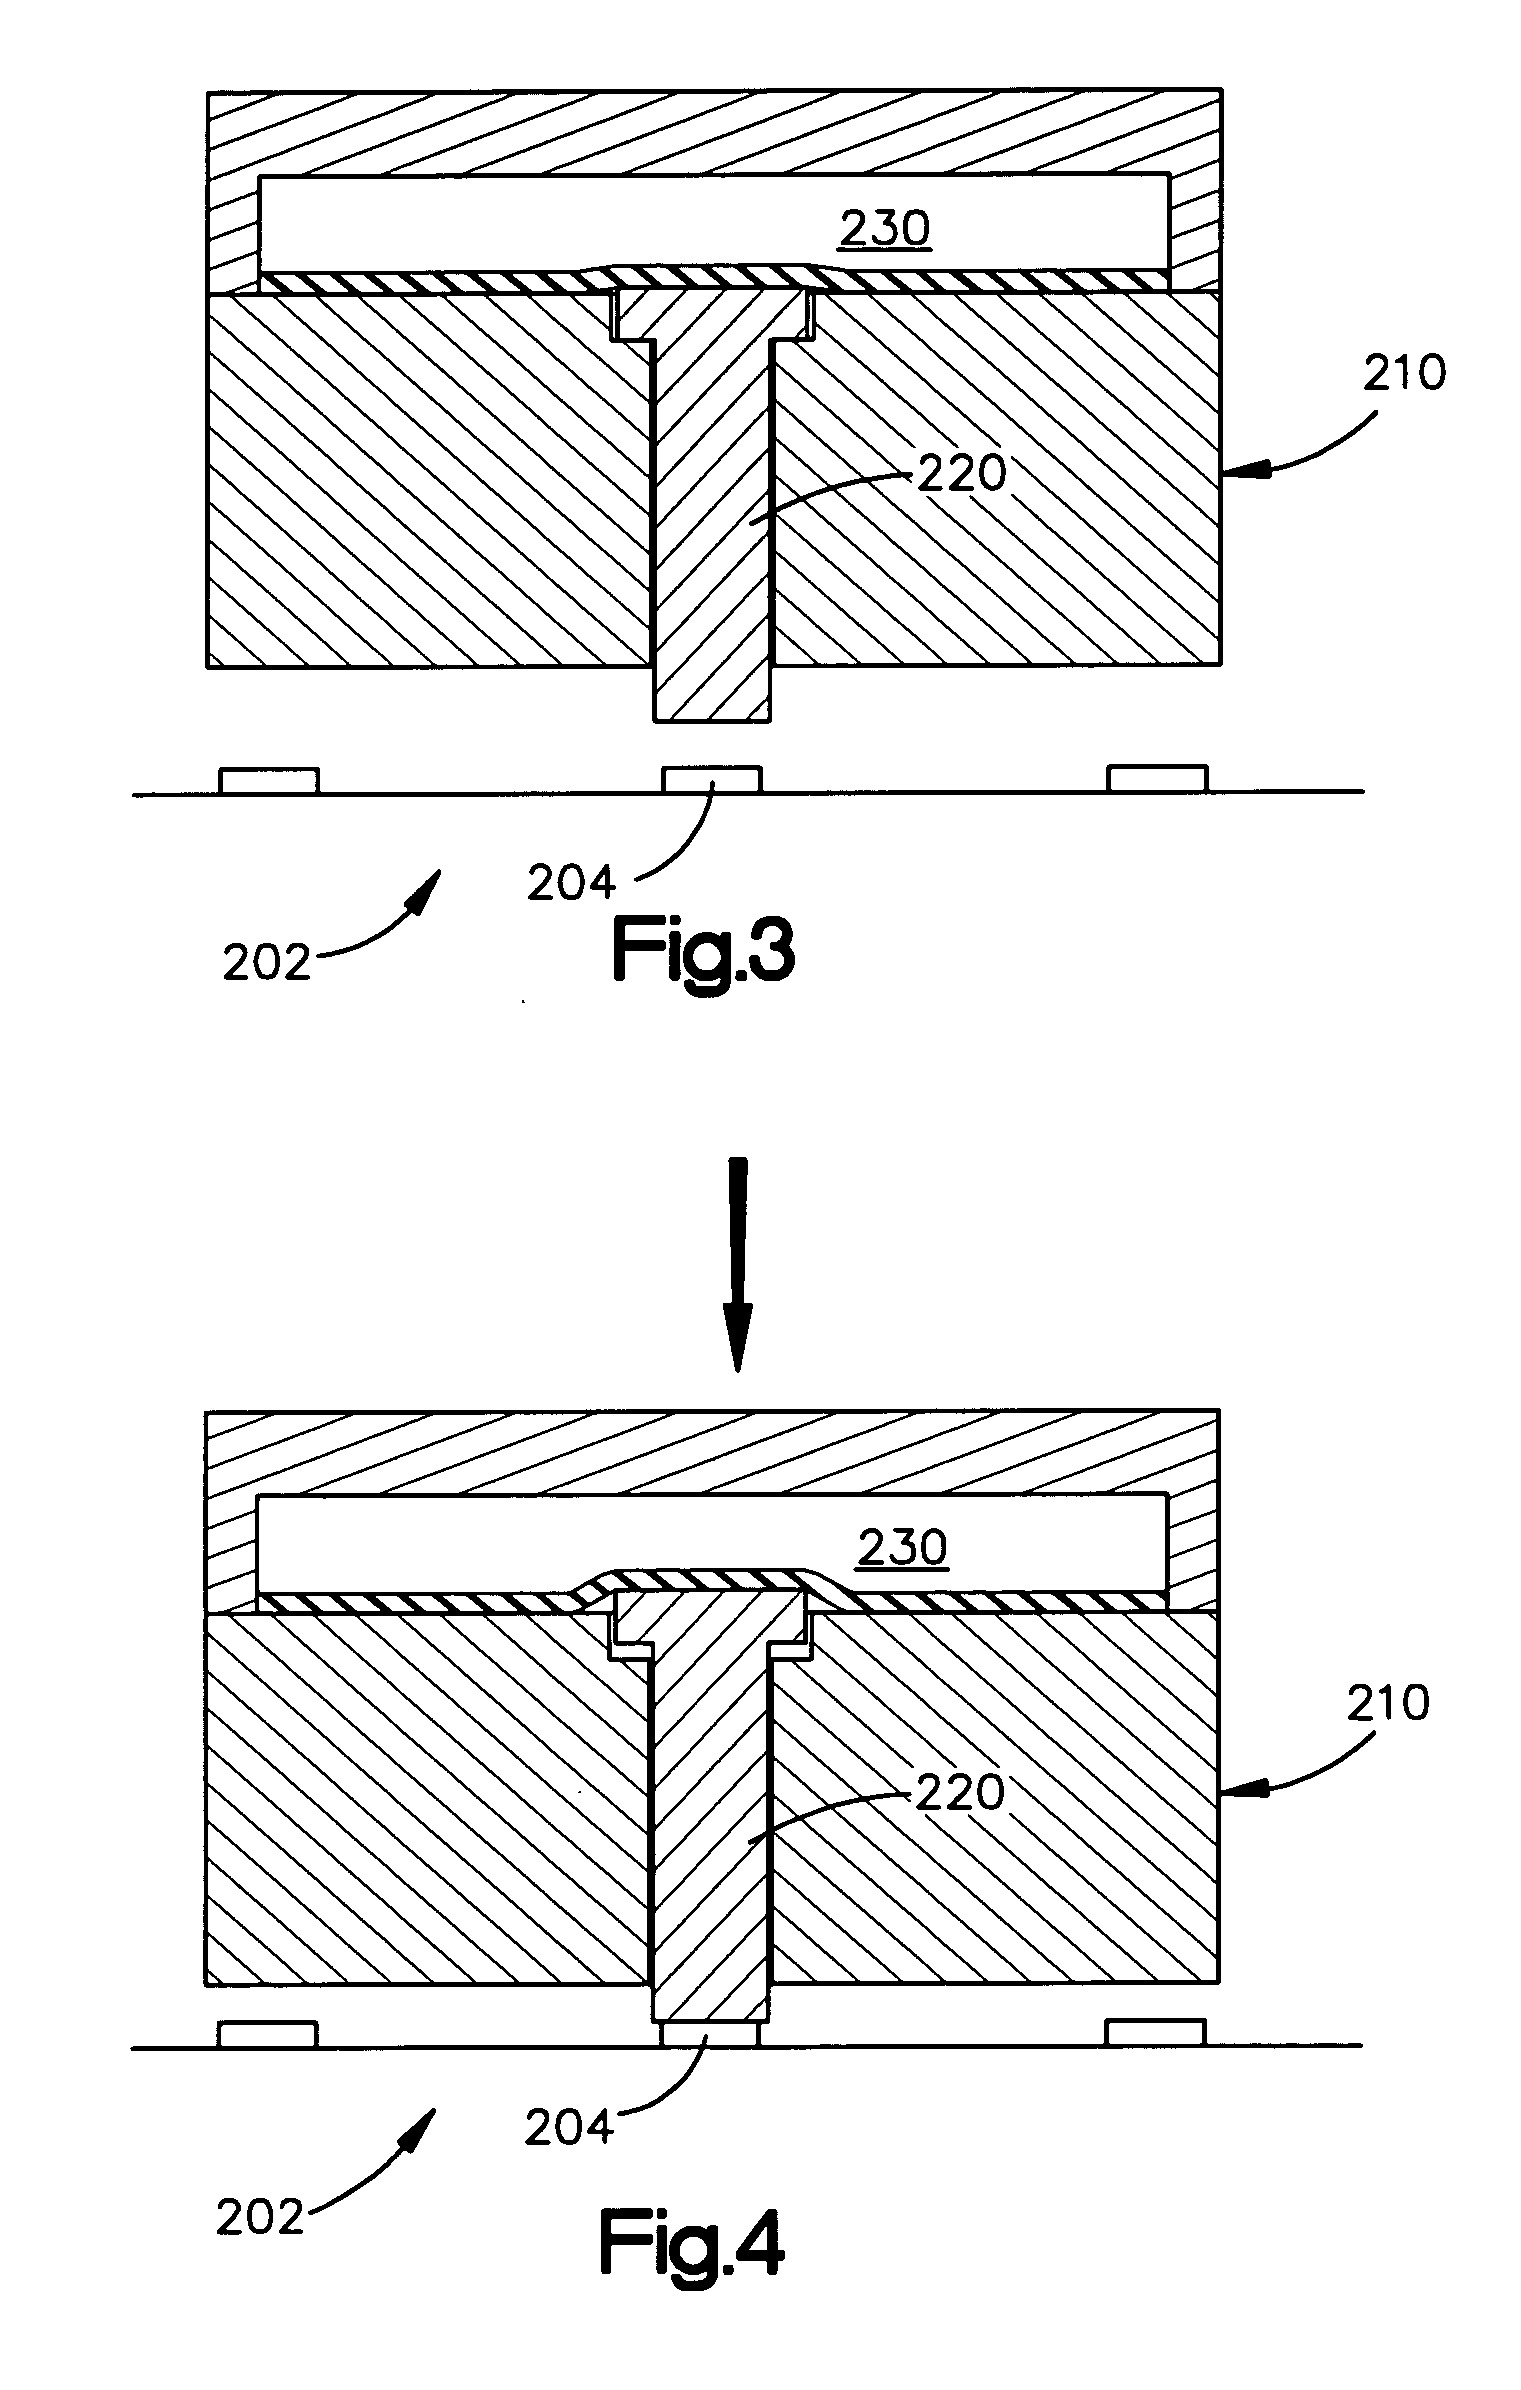 High density bonding of electrical devices